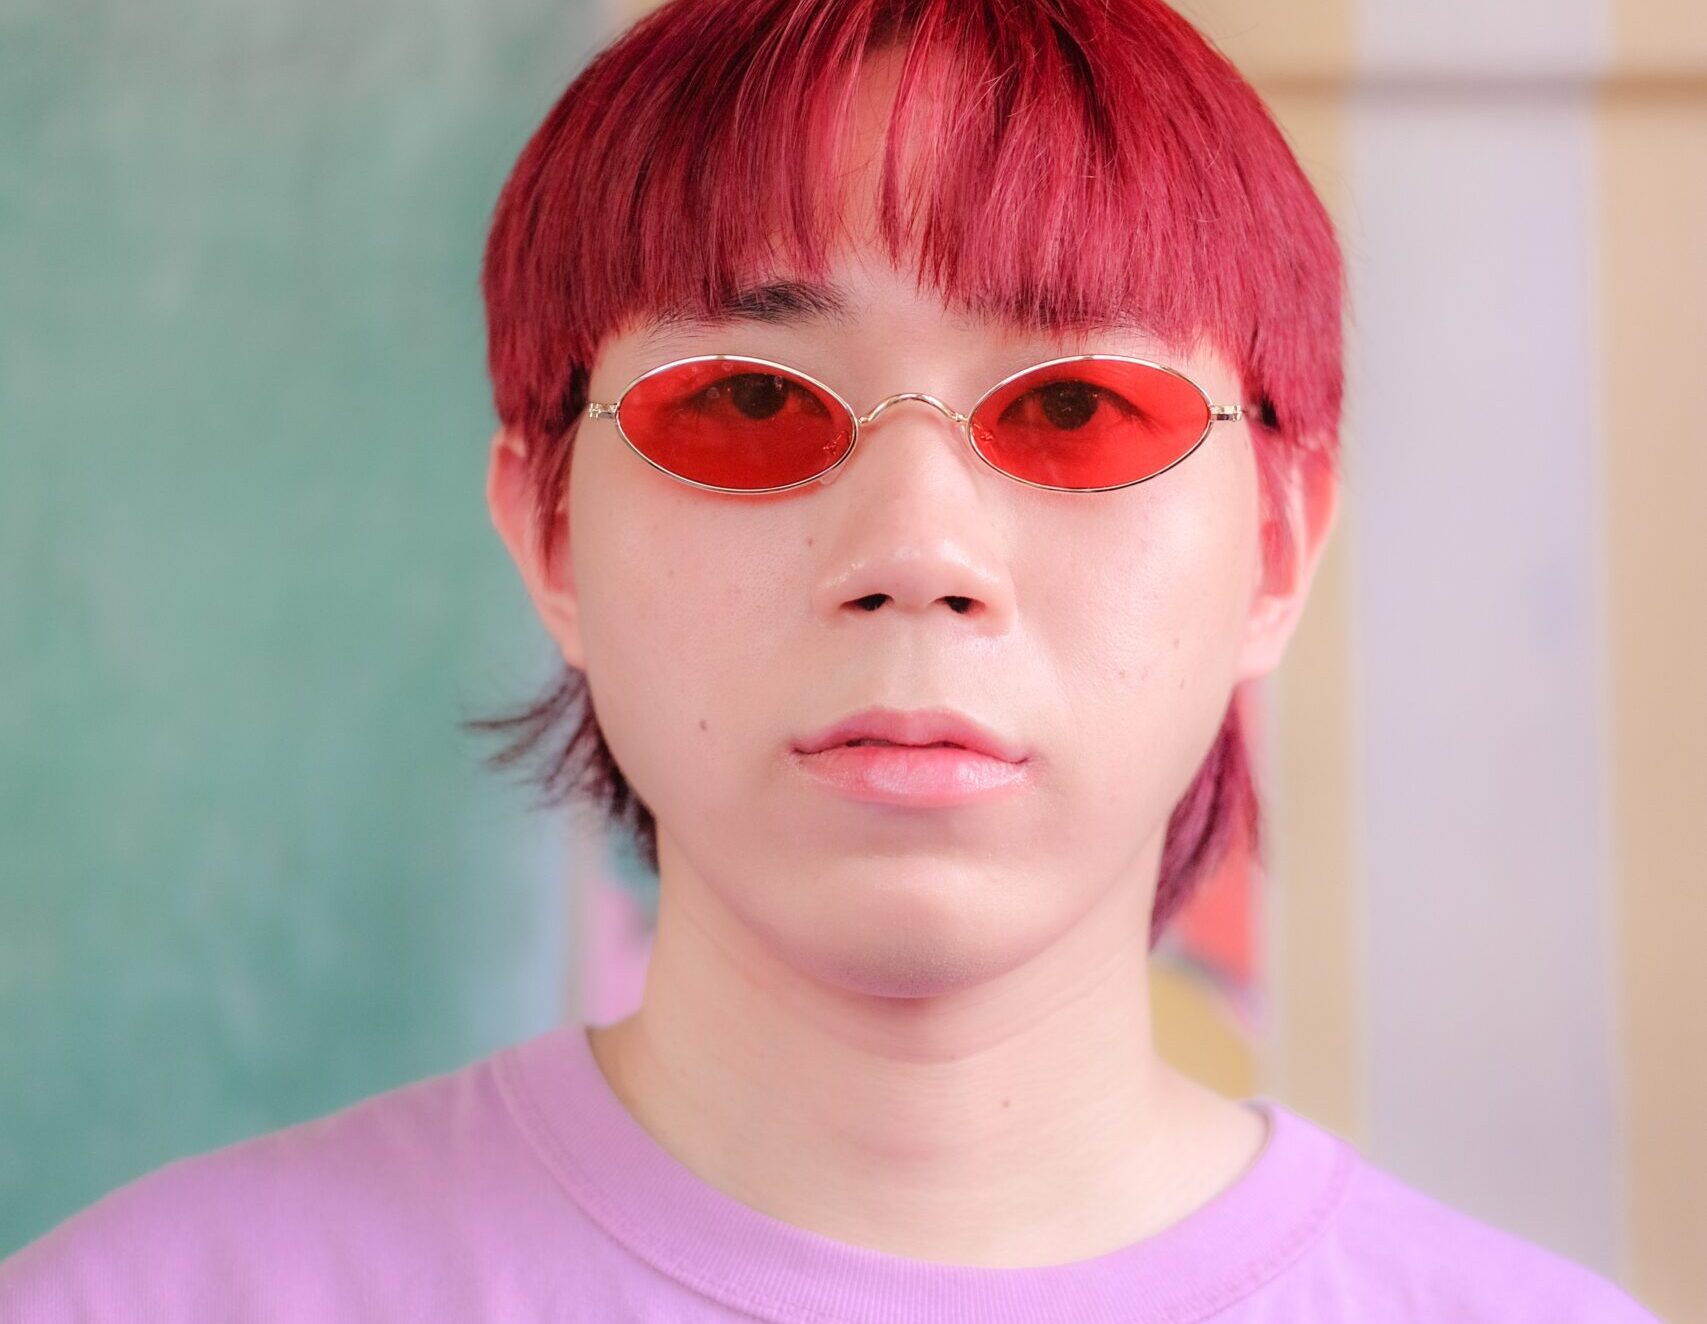 Man wearing red-tinted glasses and a pink shirt.